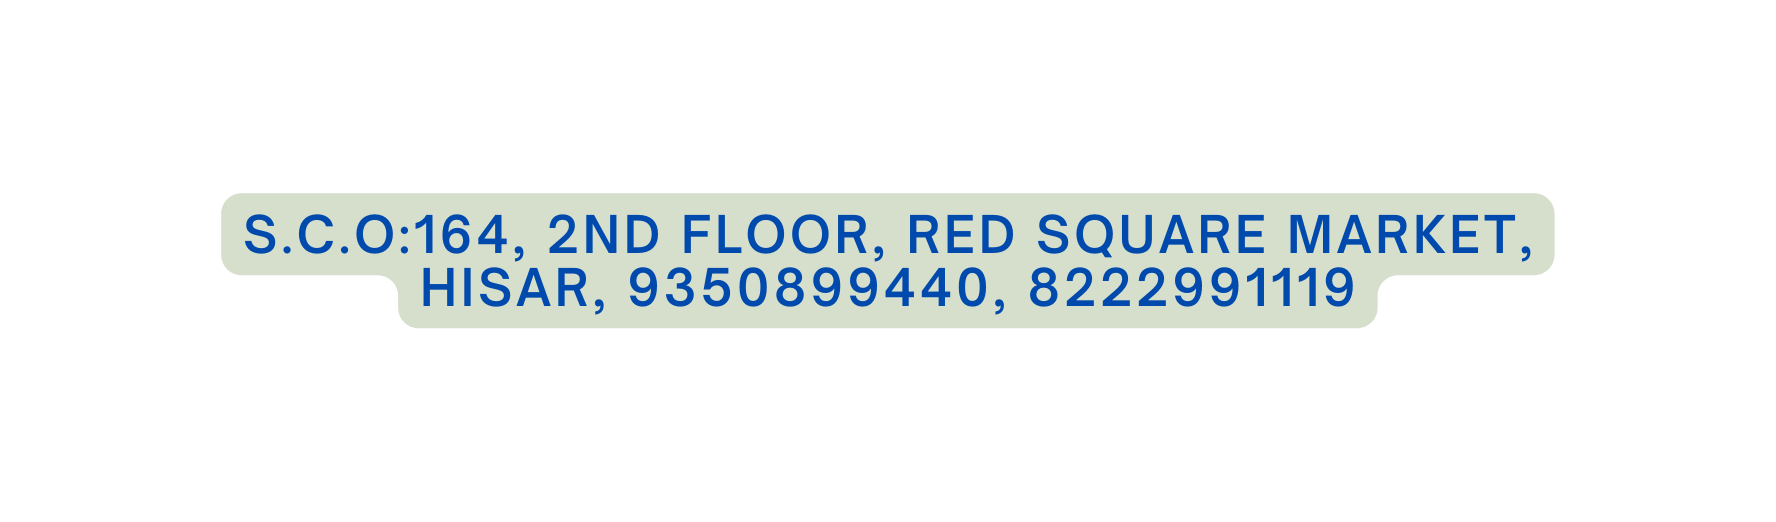 S C O 164 2ND FLOOR RED SQUARE MARKET HISAR 9350899440 8222991119